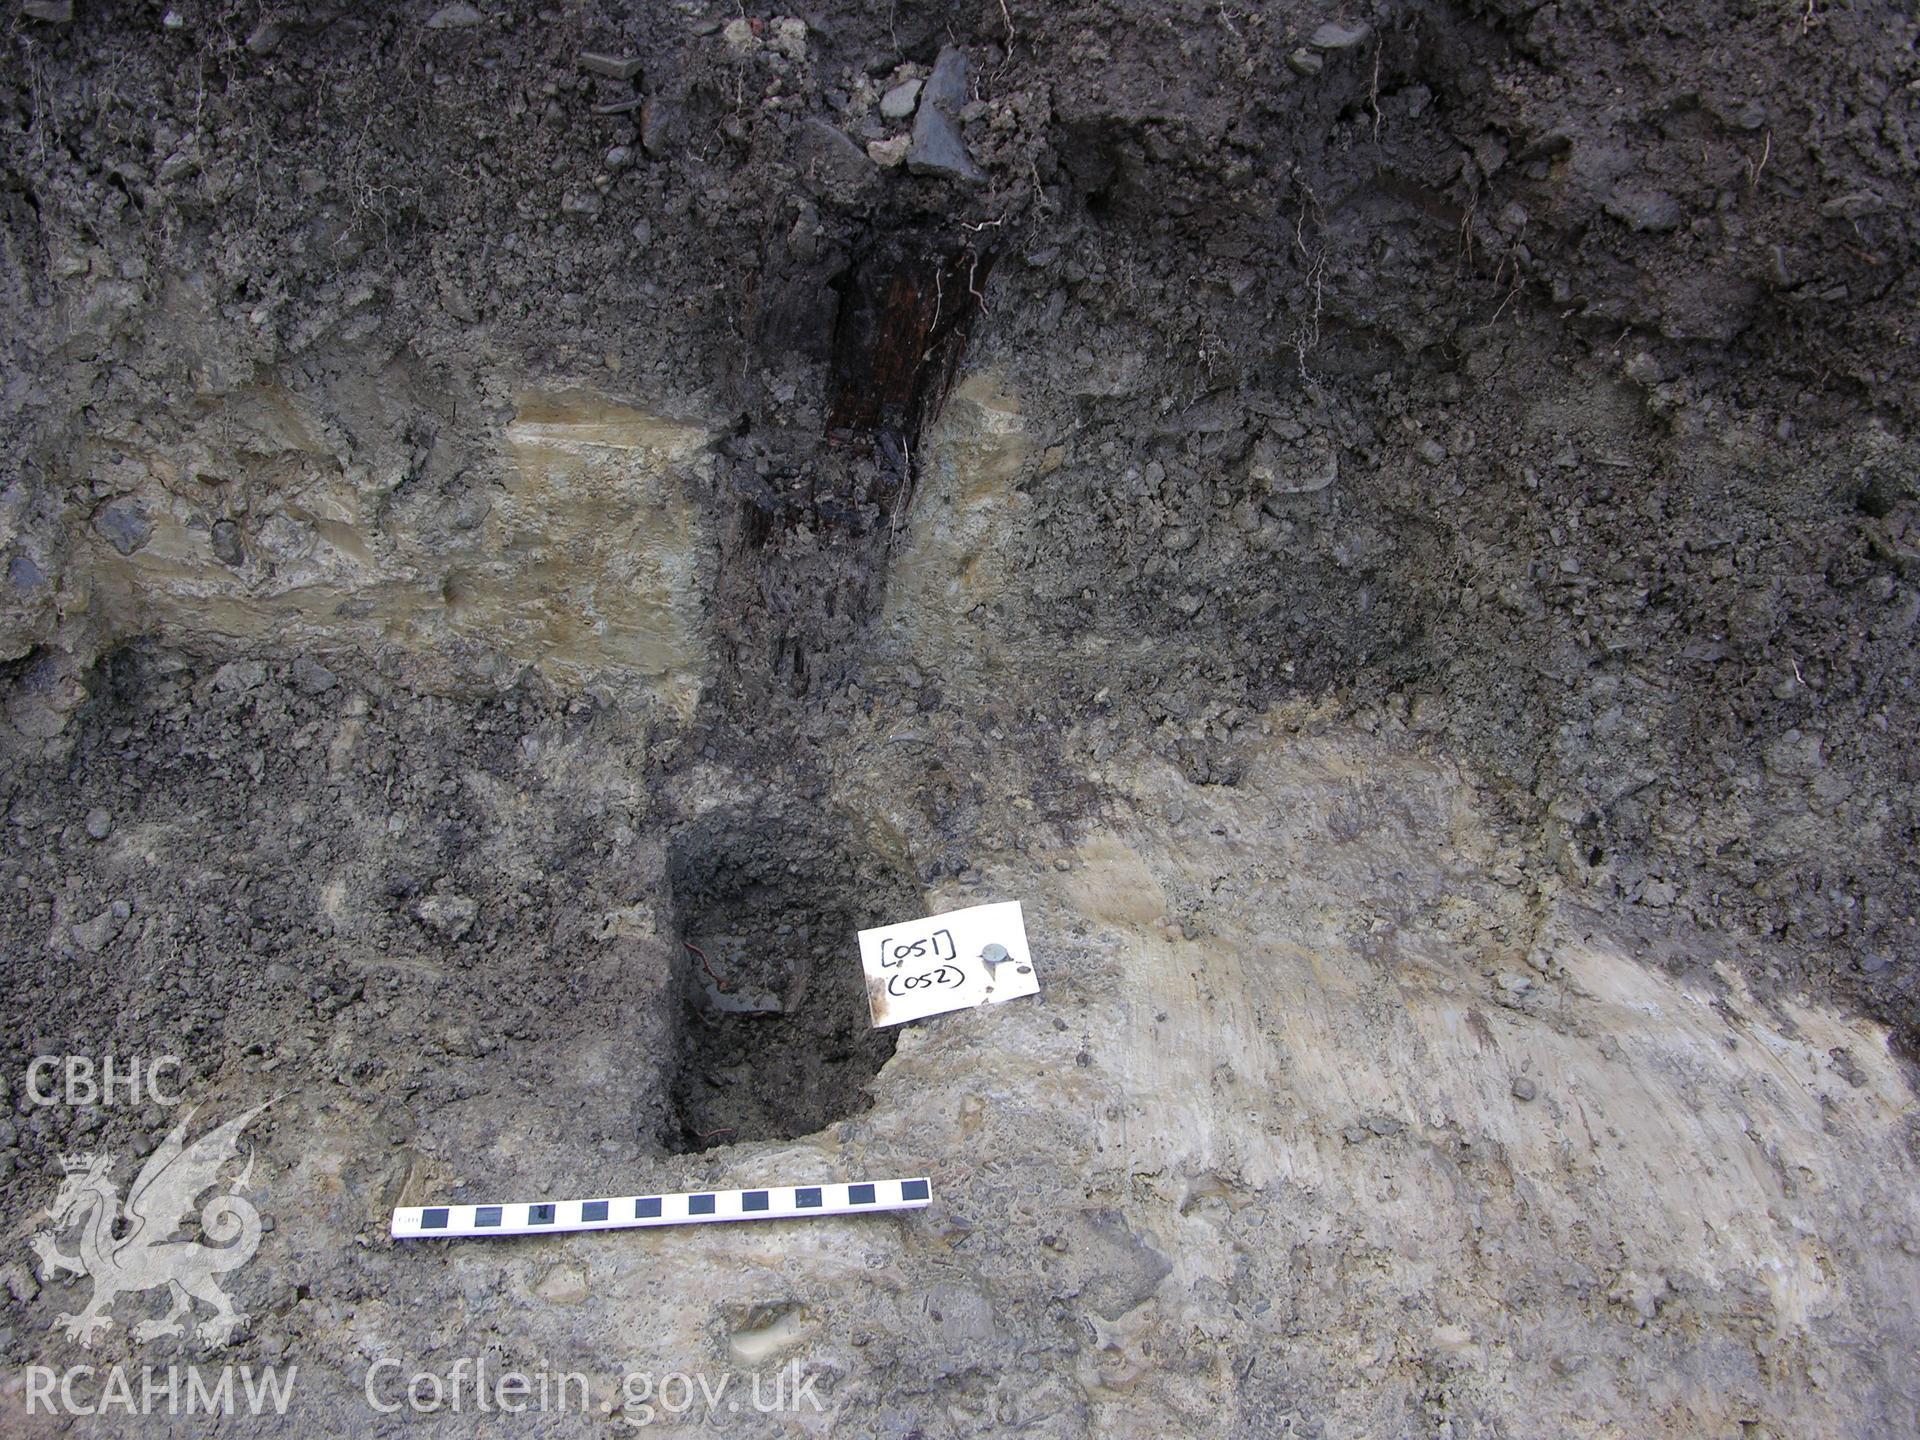 Colour digital photograph showing view of posthole with post - part of the Archaeological Excavation report for Horse Yard Farm, Evenjobb (CAP Report 607) by Chris E Smith, from a Cambrian Archaeological Projects assessment survey.